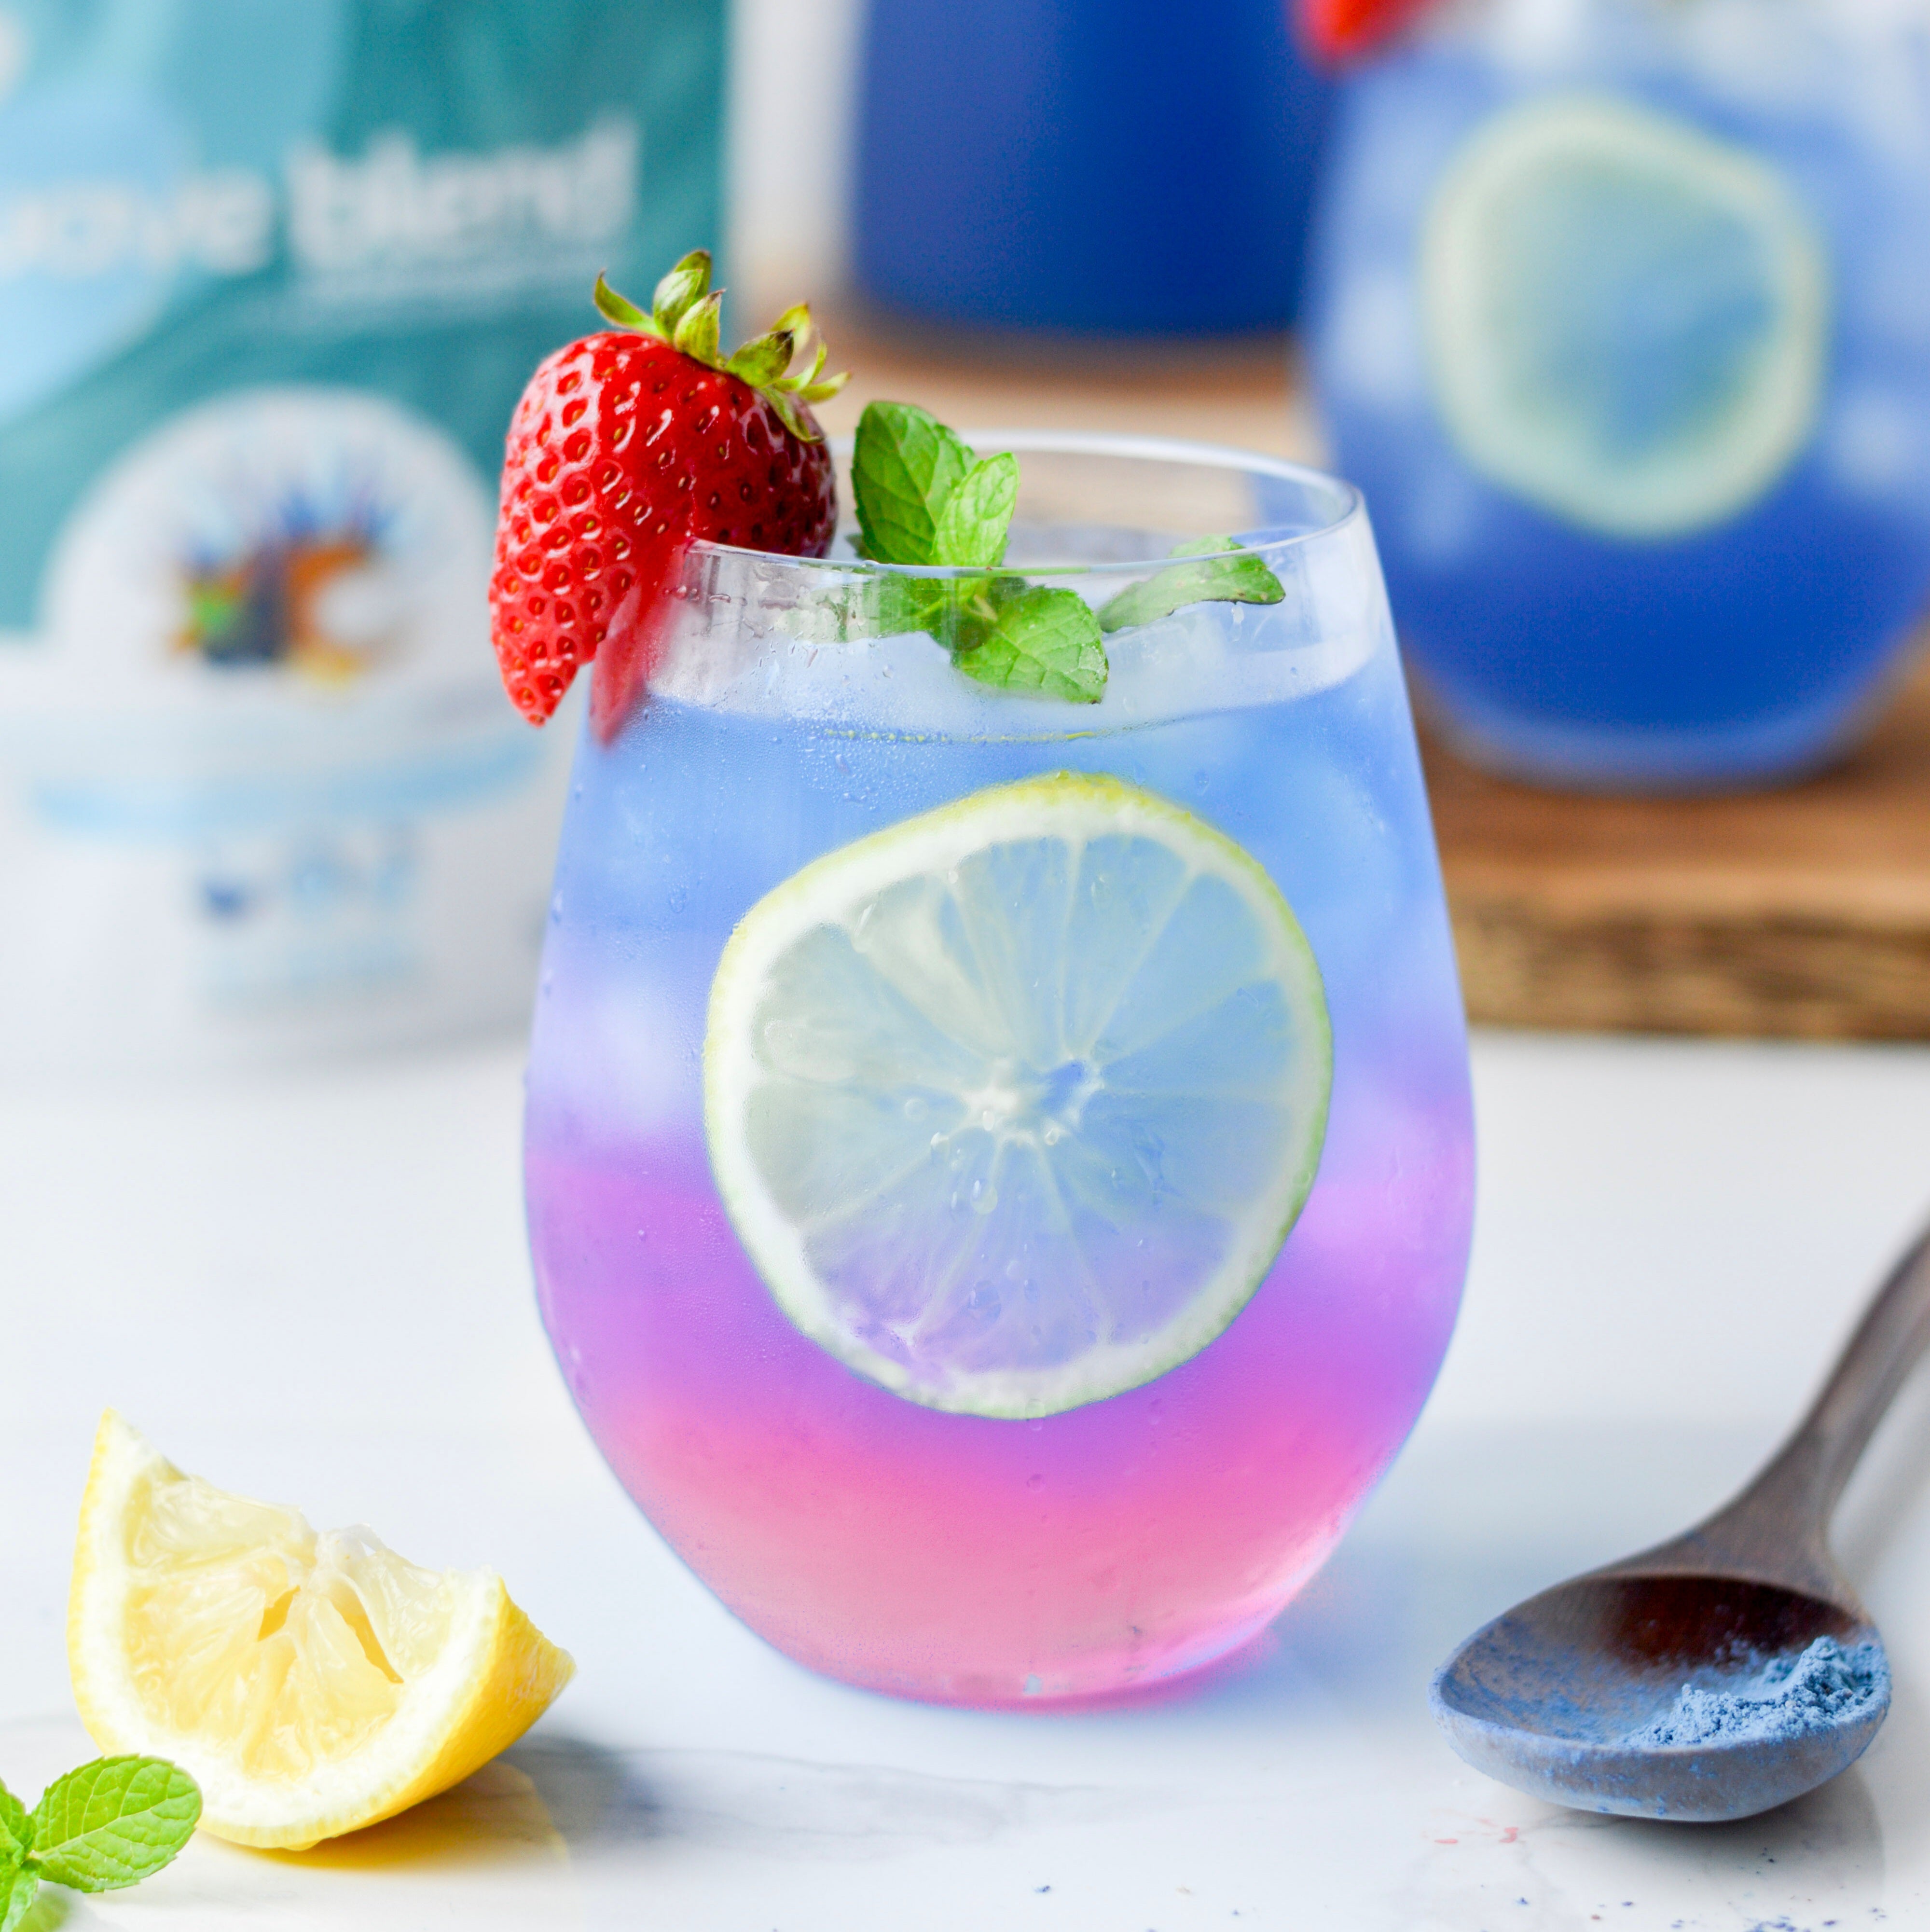 Sparkling wave refresher made using SMOOV wave blend. Mocktail packed with protein, antioxidants, vitamins for energy, digestion, health and immunity.